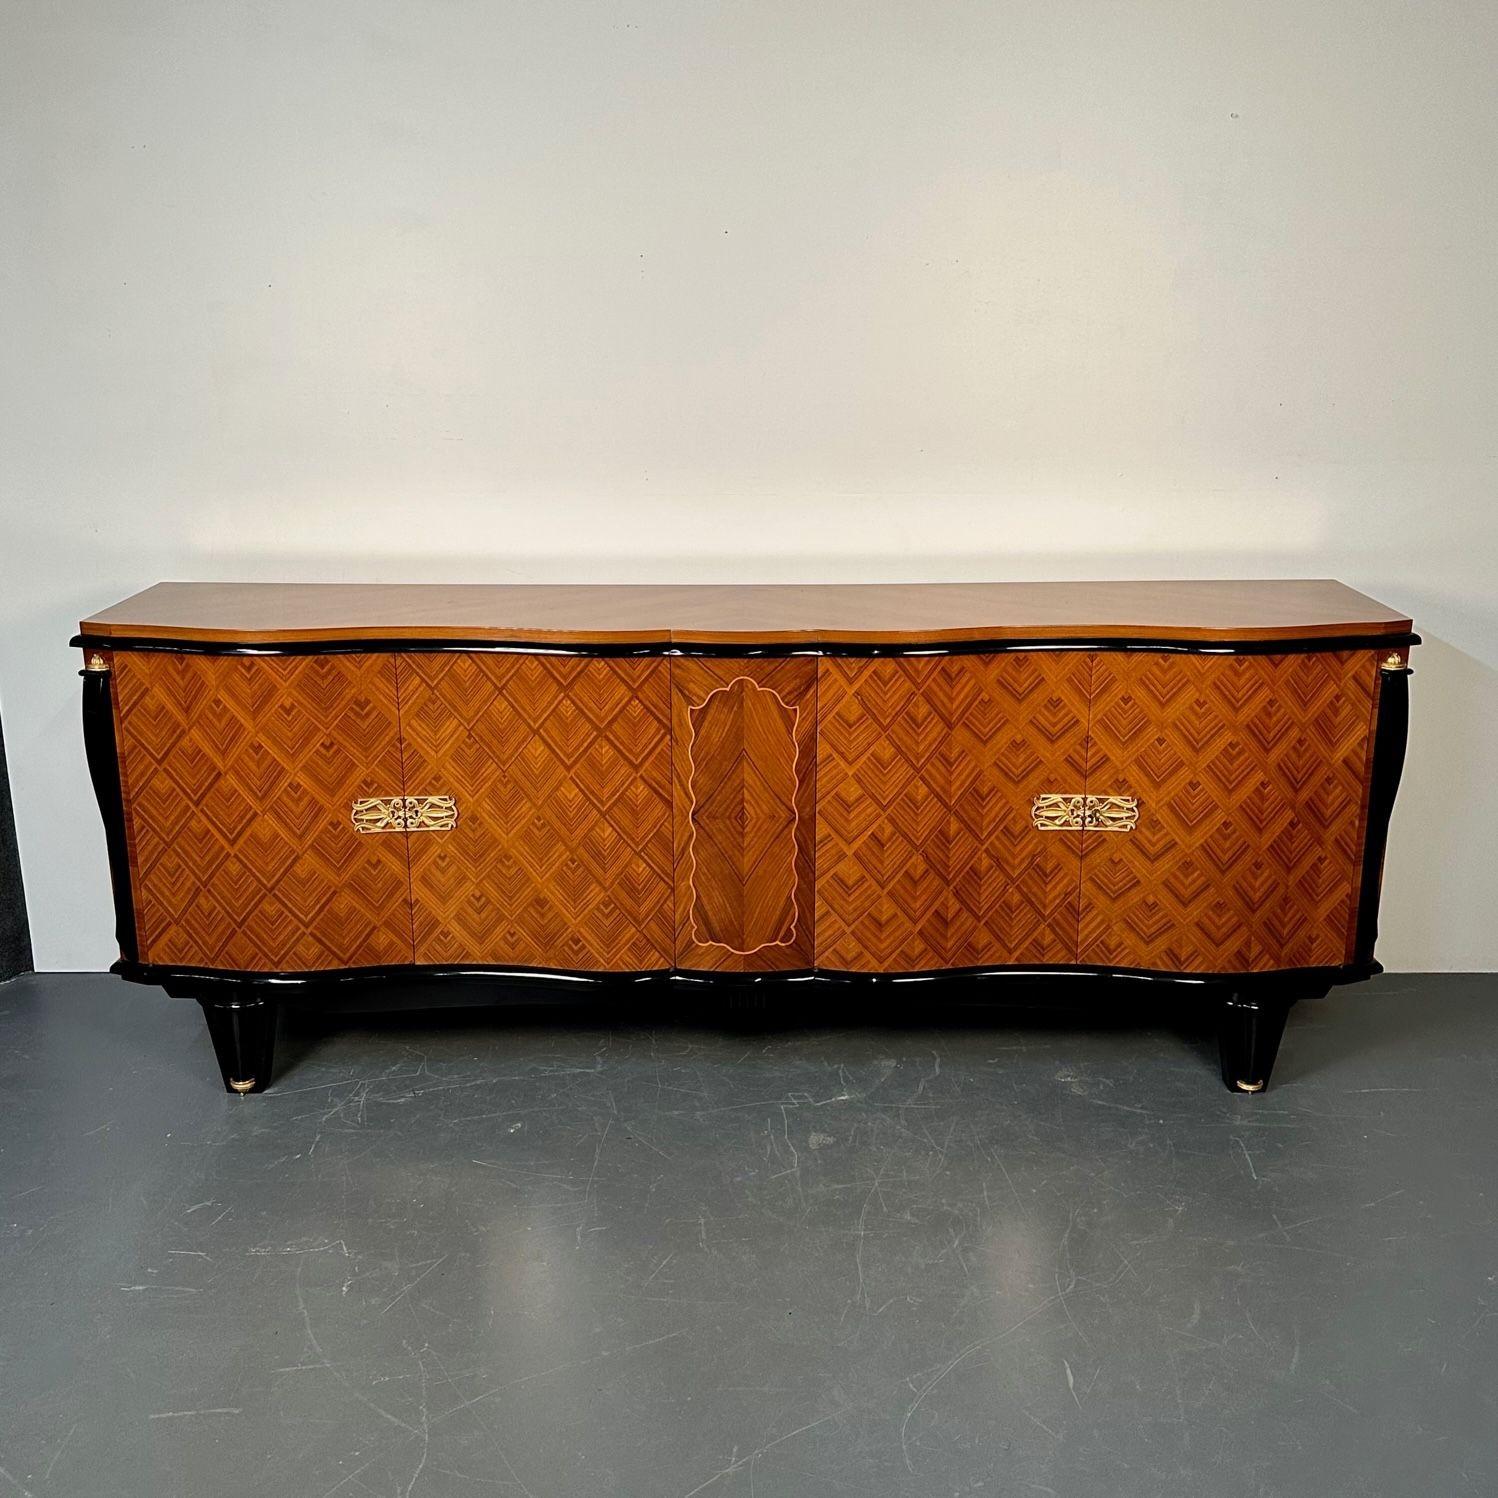 French Art Deco Marquetry Sideboard, Buffet, Rosewood, Walnut, Marquetry, Palatial
 
A stunning monumental sideboard in the Art Deco taste. The satinwood marquetry front having four doors leading to a finished polished shelved and drawer interior.